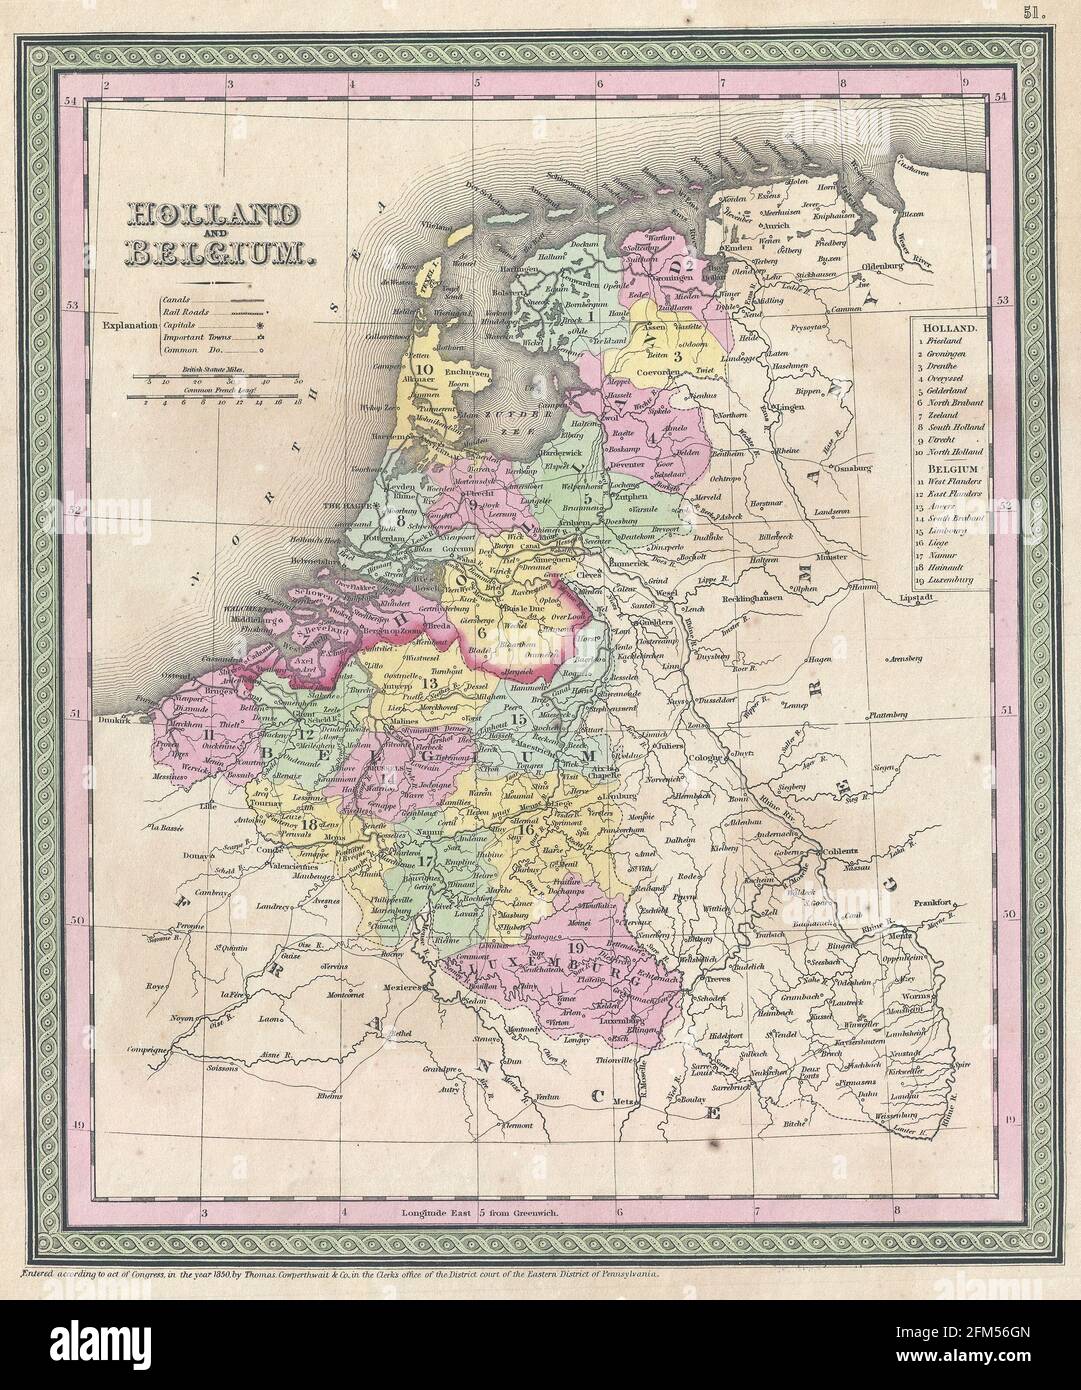 Vintage copper engraved map of Holland from 19th century. All maps are beautifully colored and illustrated showing the world at the time. Stock Photo